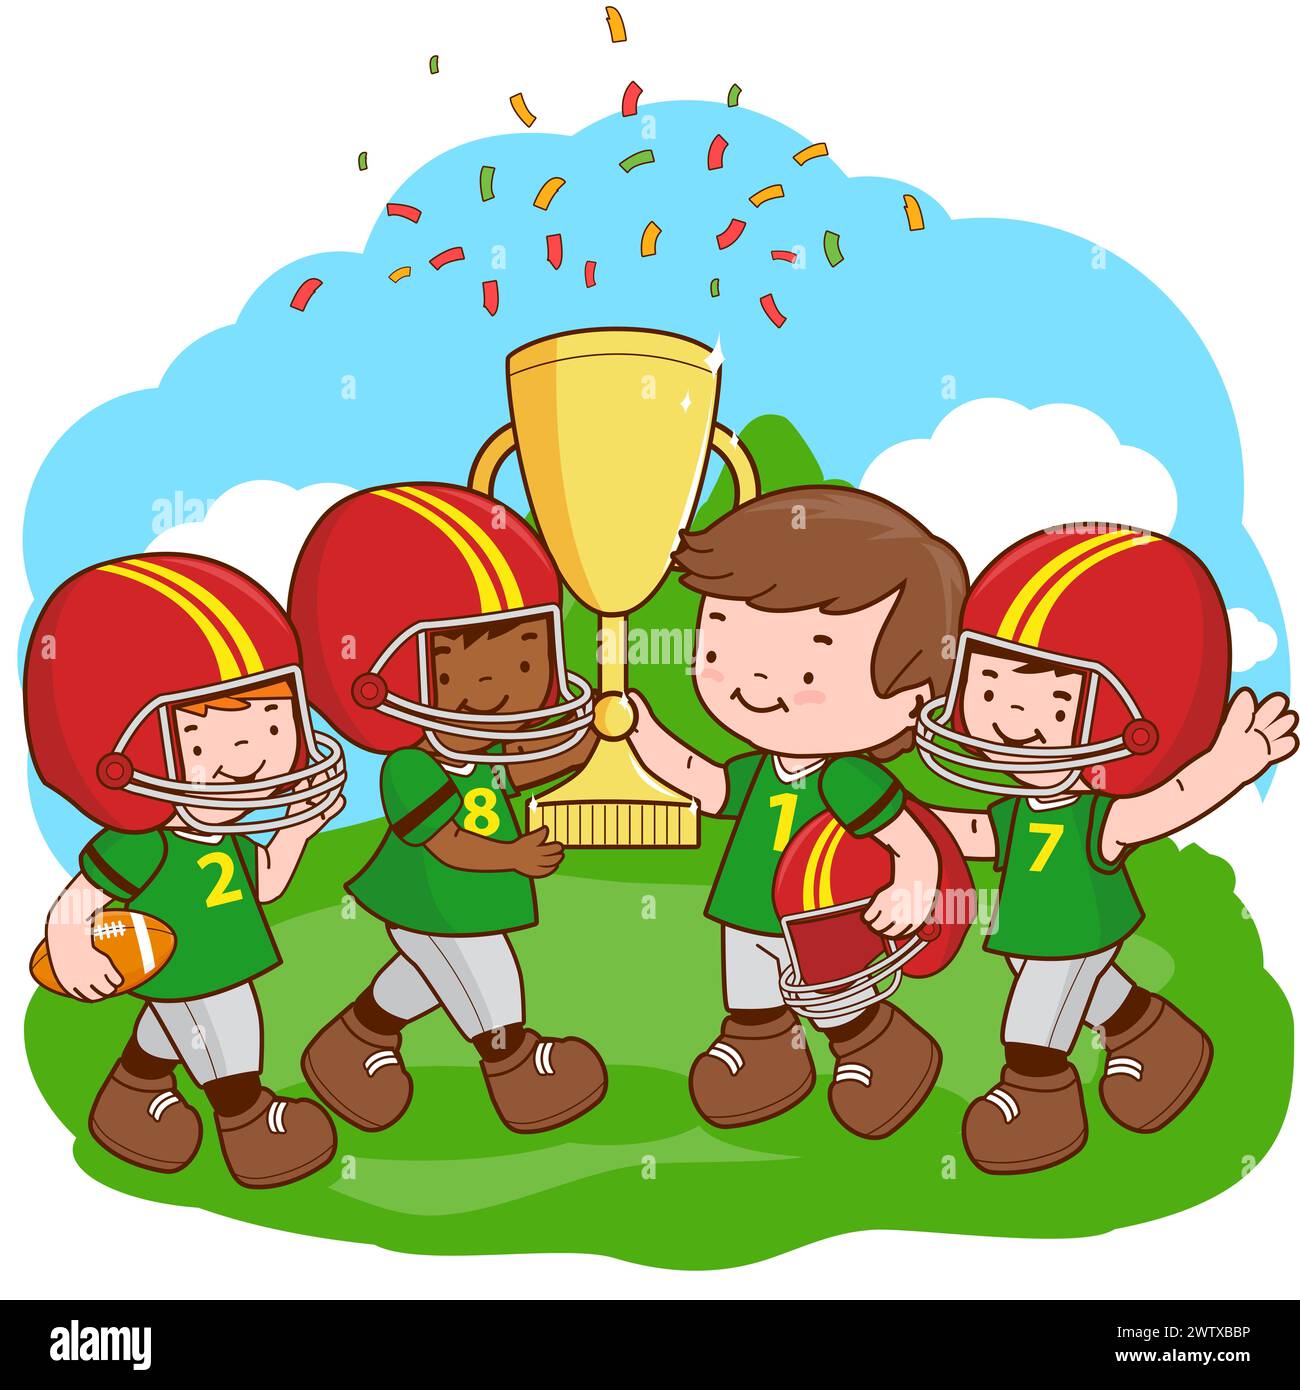 Children rugby players cheering and holding a golden trophy at the football field. Stock Photo